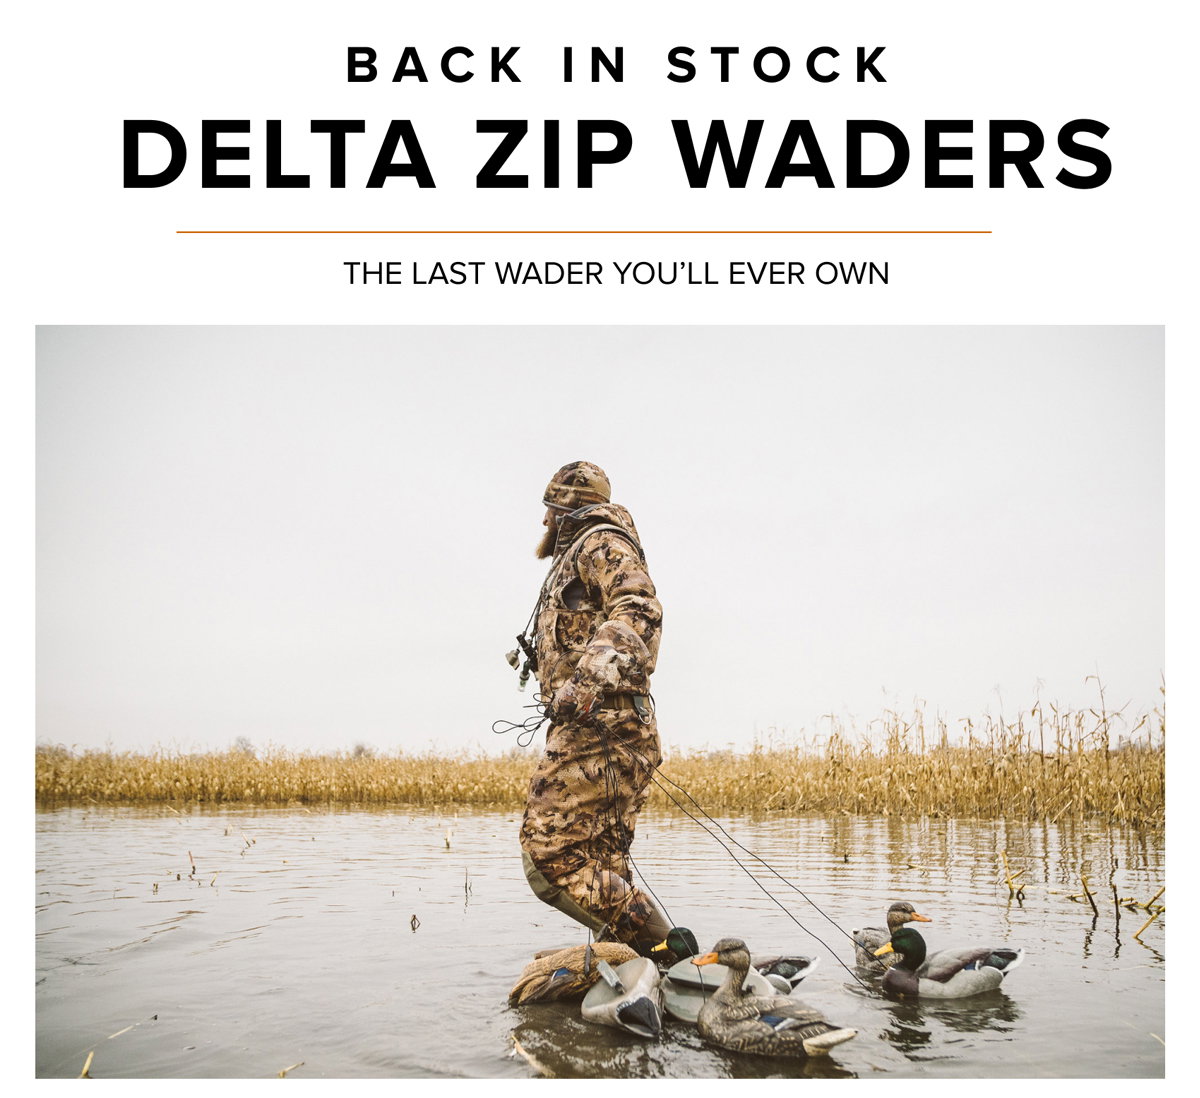 Sitka Gear: Delta Zip Waders Are Back